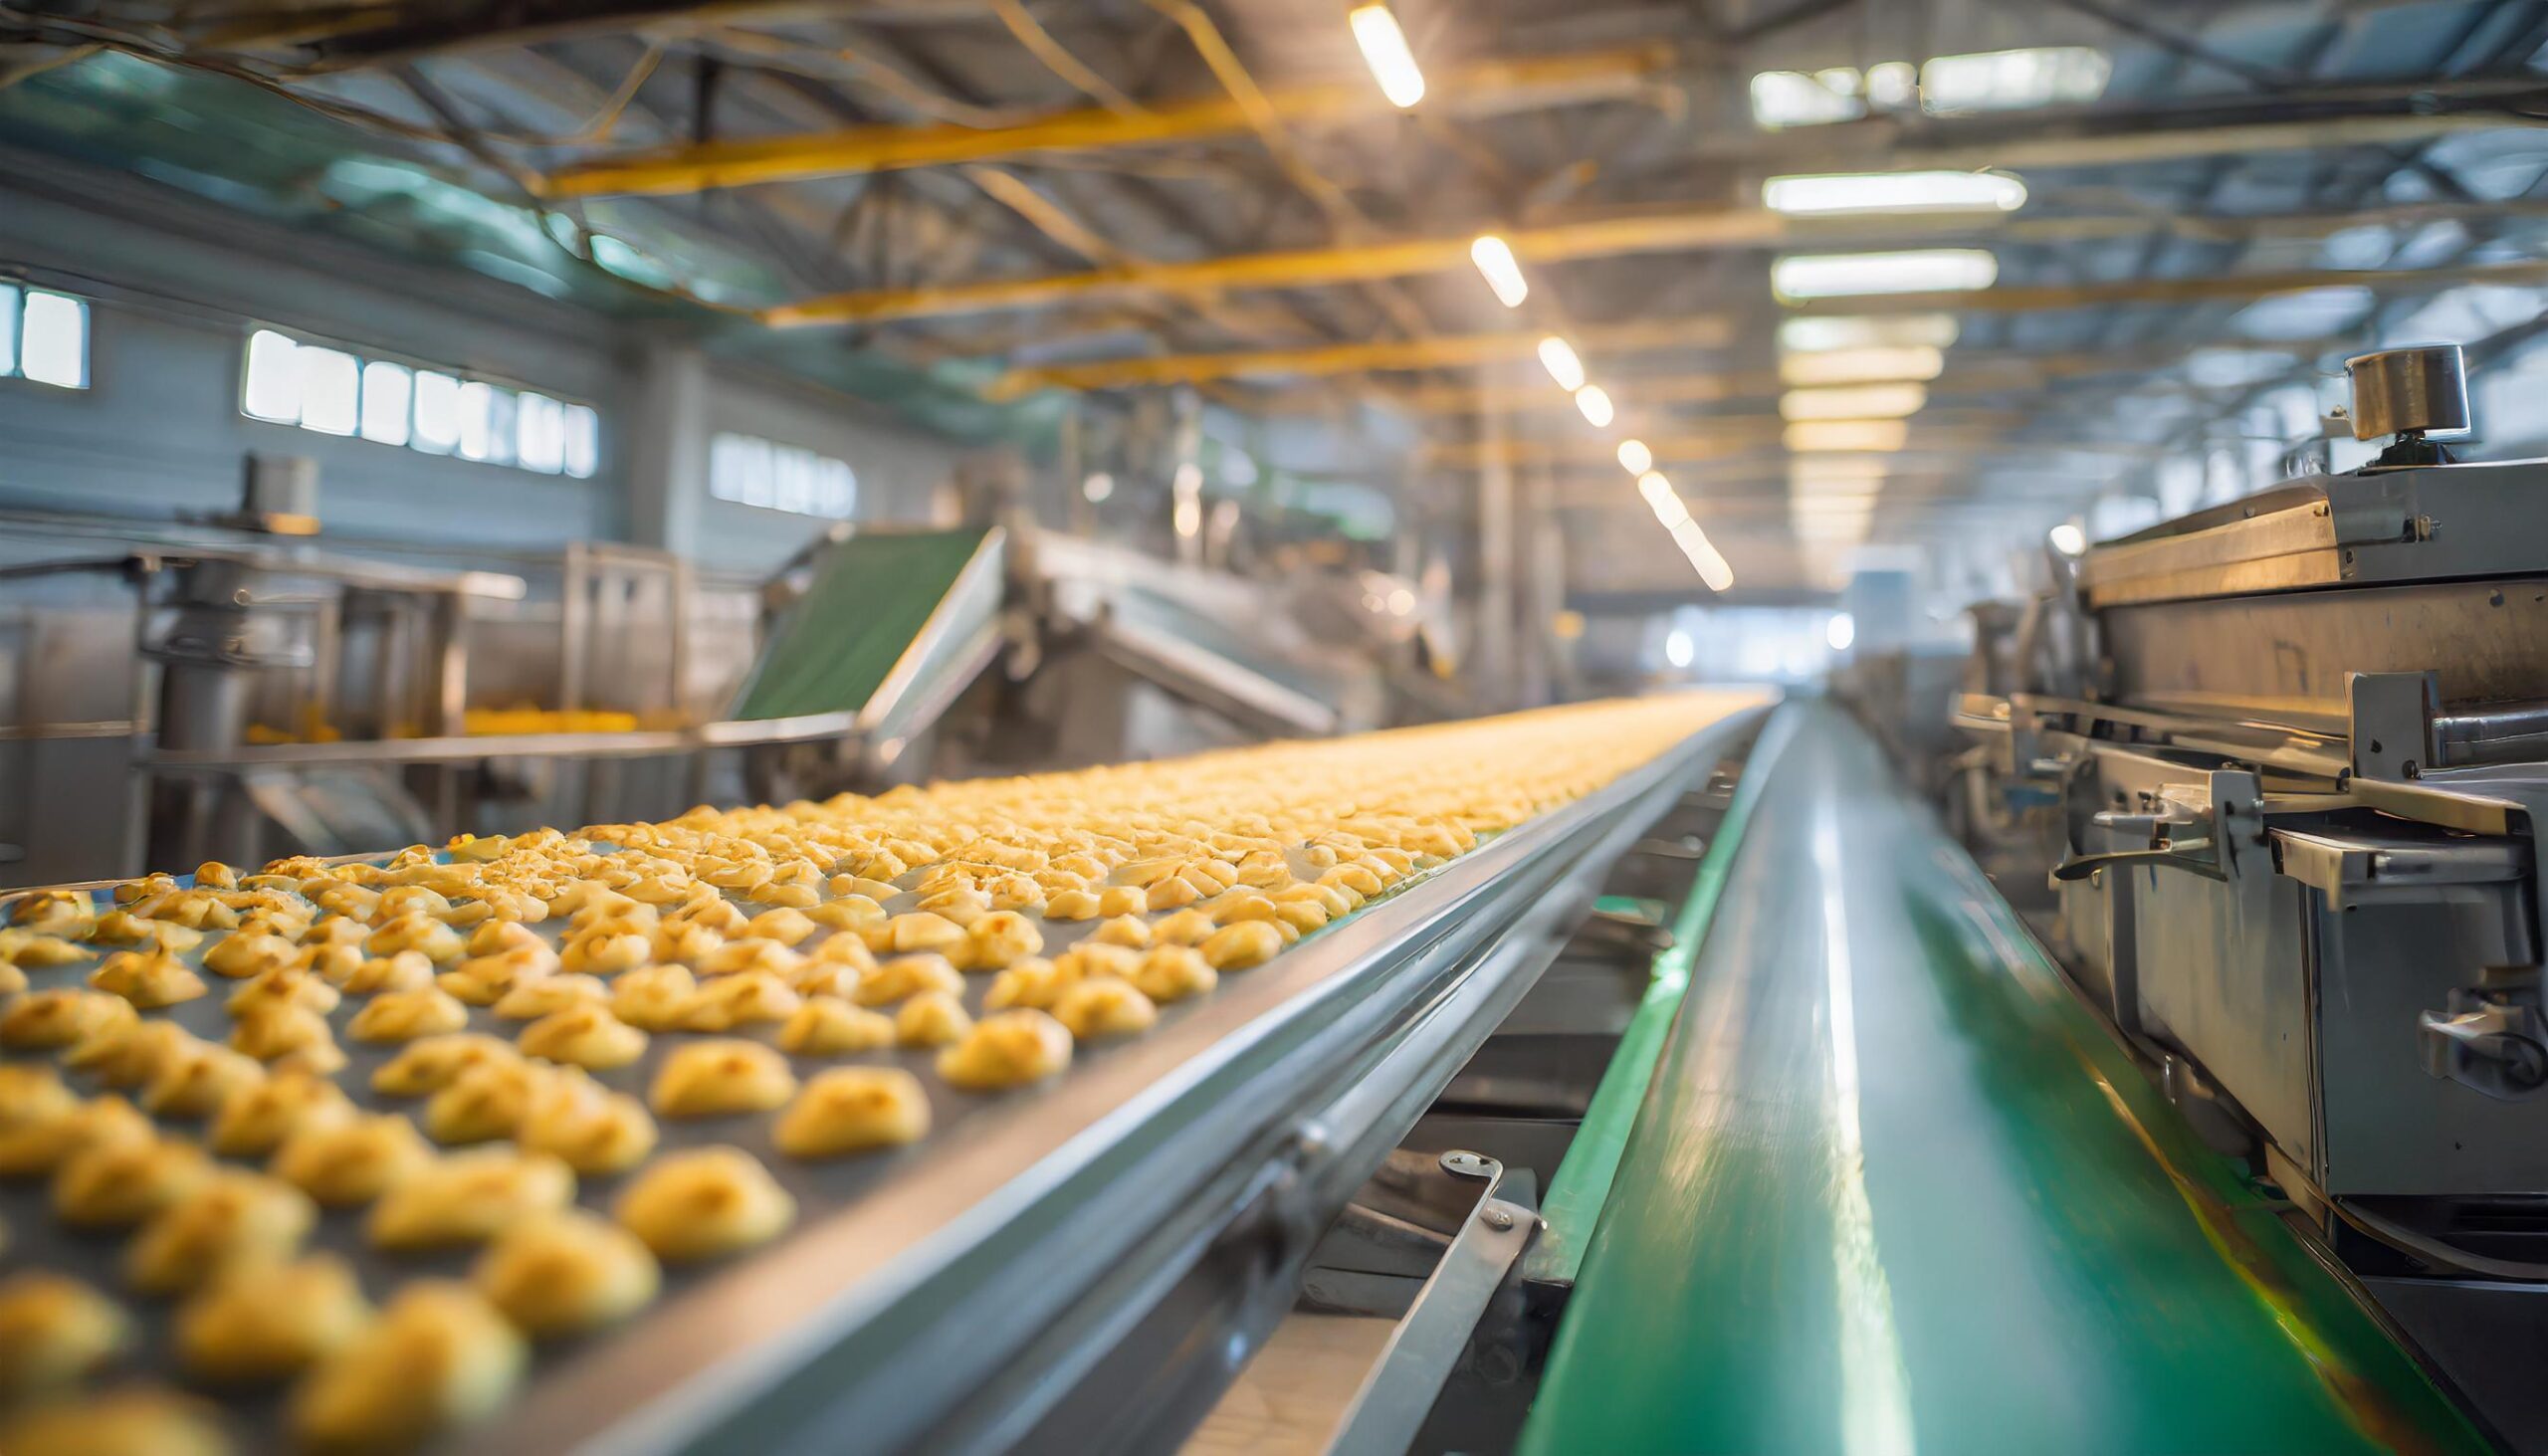 Food processing in India reaches critical point